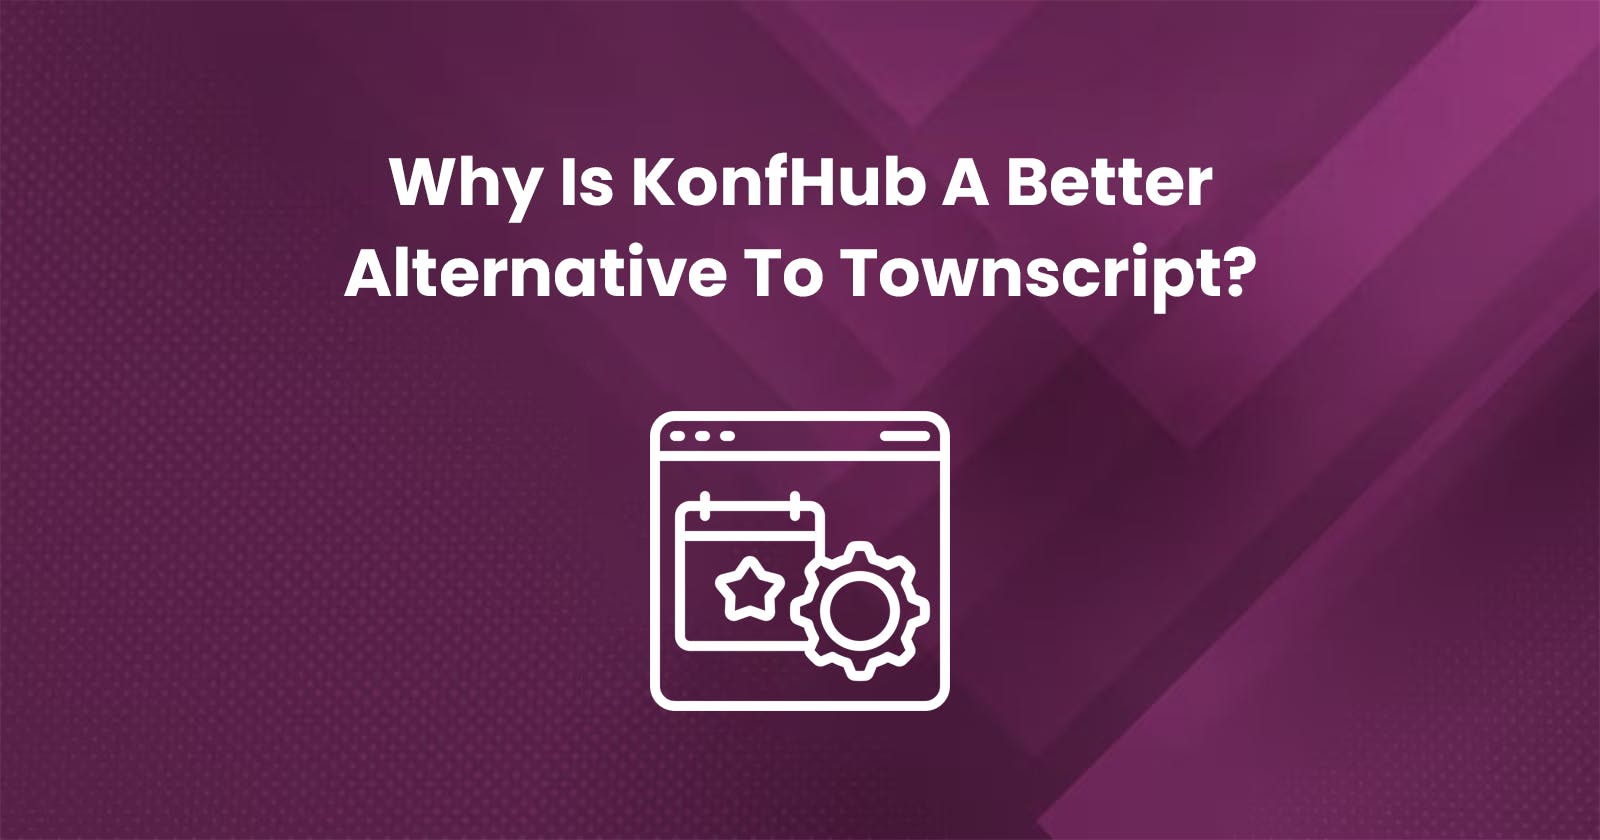 Why Is KonfHub A Better Alternative To Townscript?